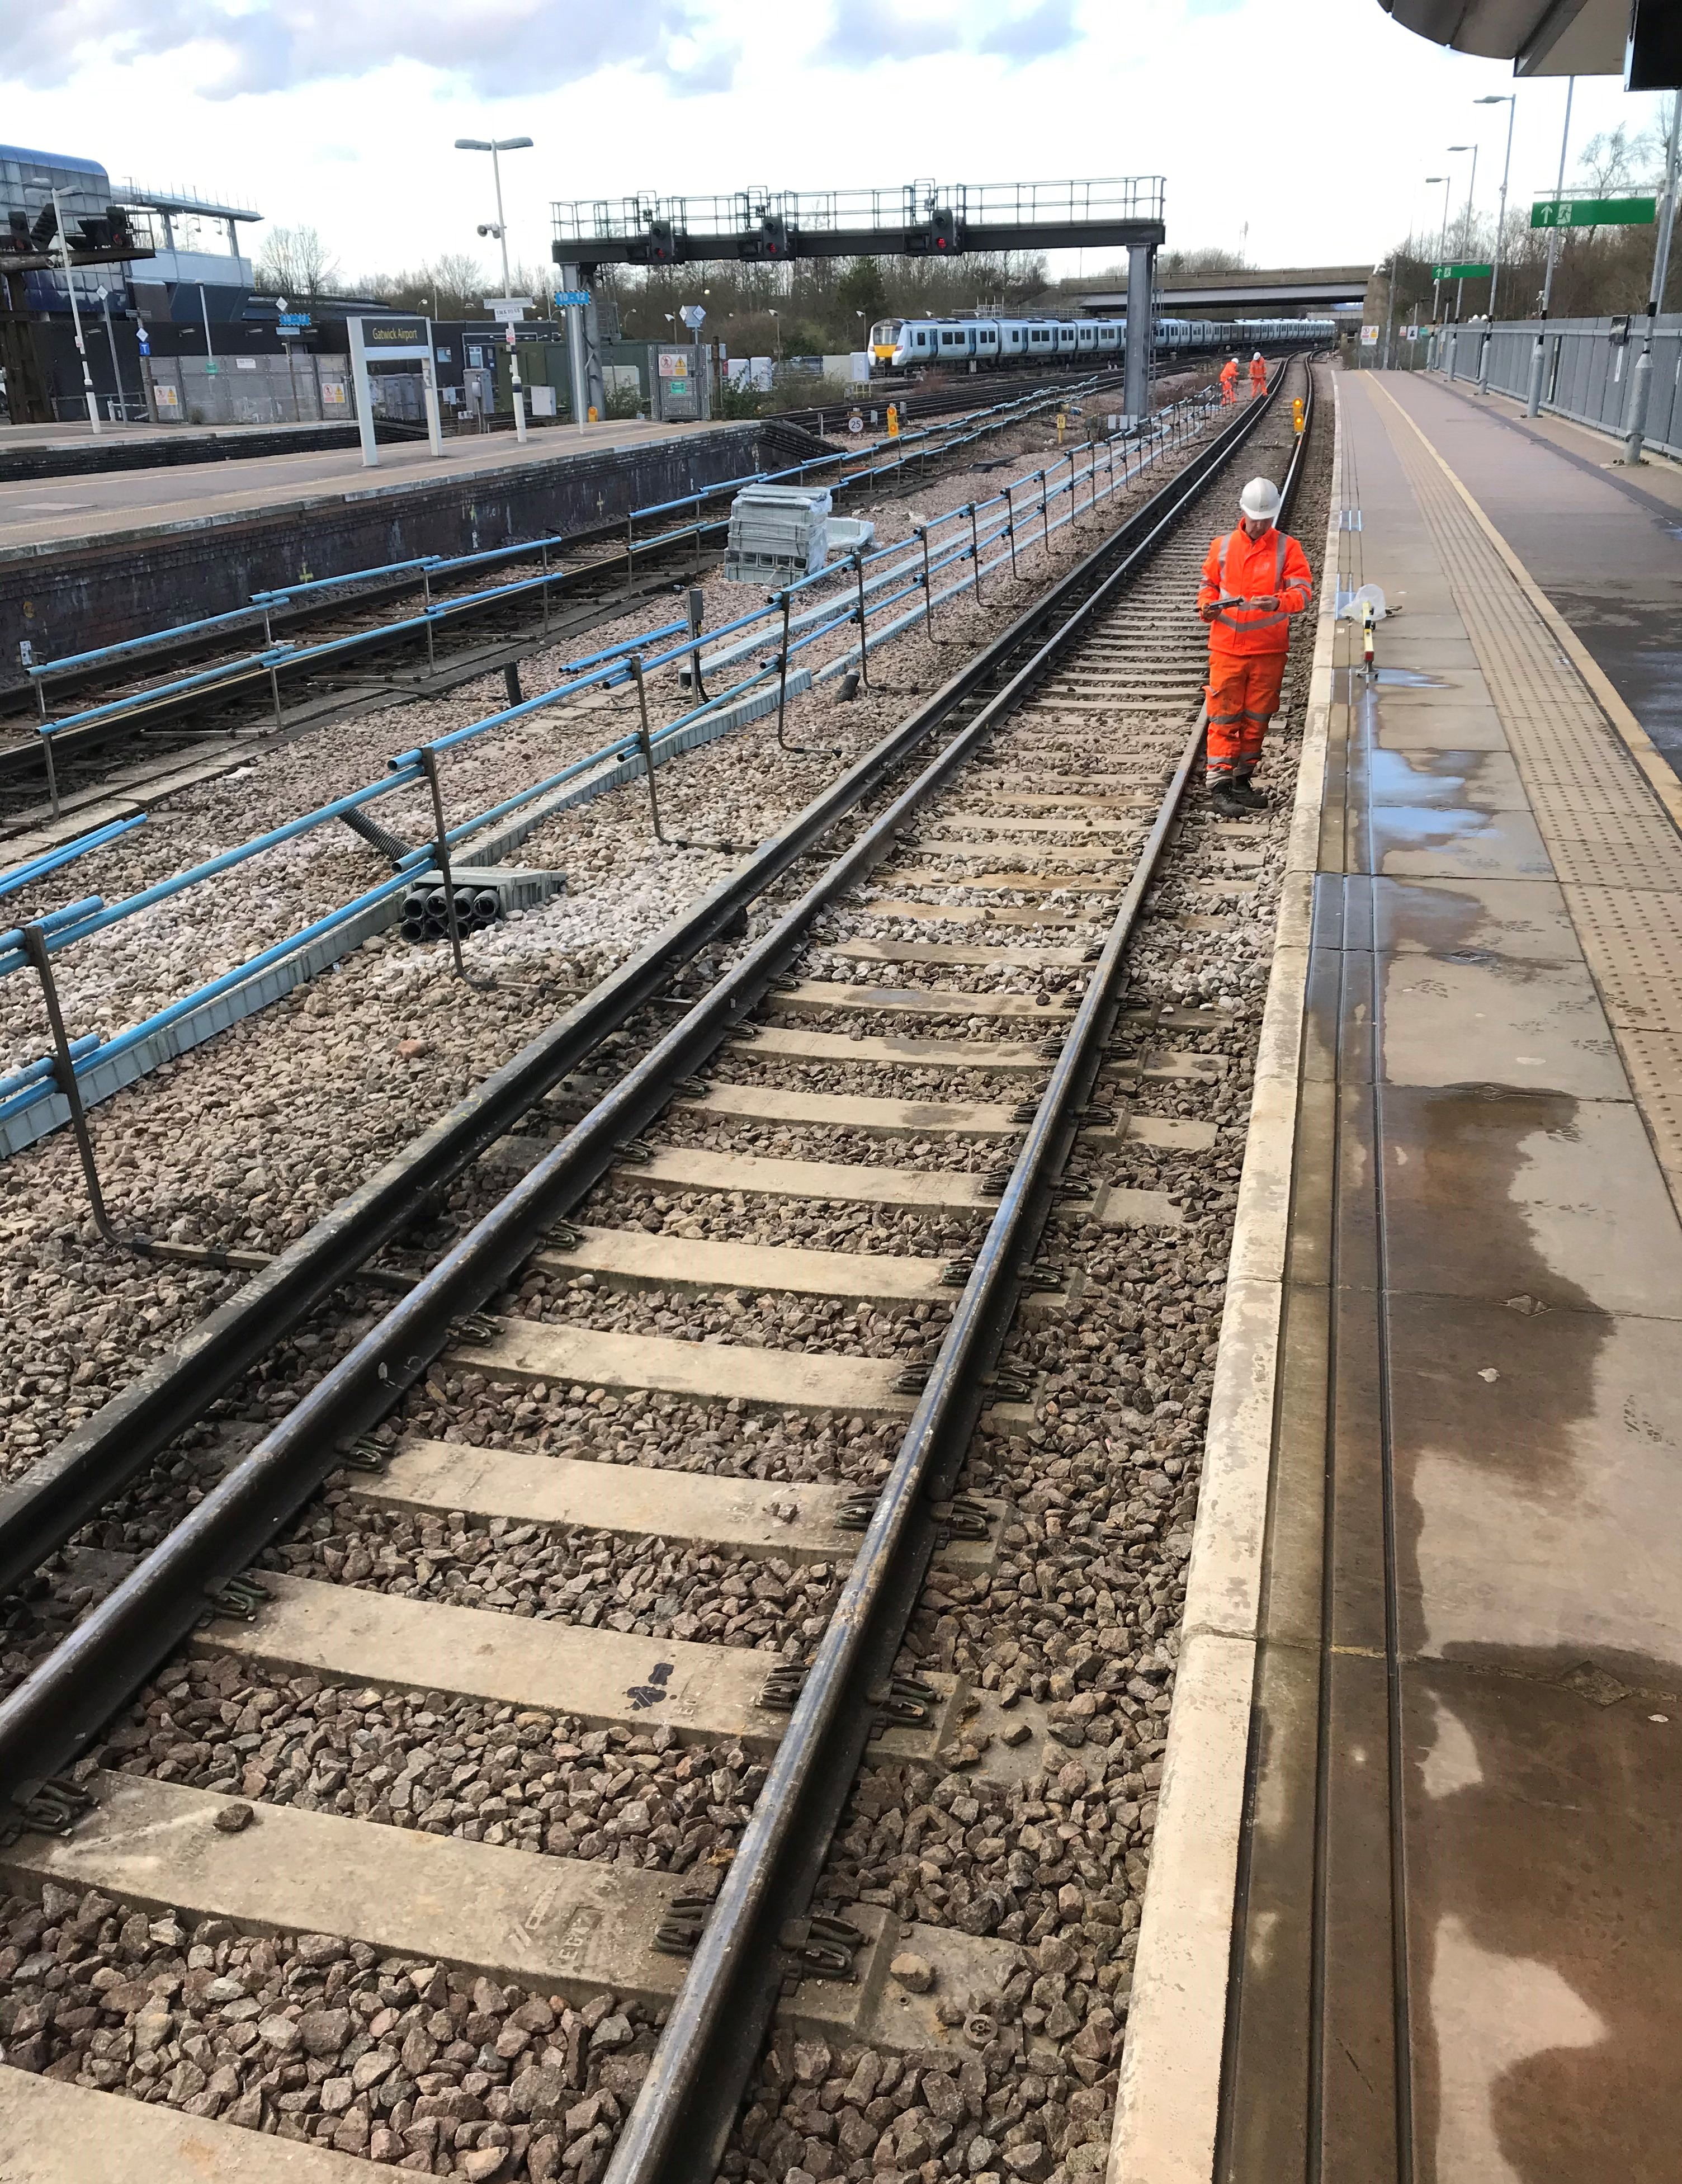 Lowery Ltd Gatwick Station Project – High Voltage and Low Voltage Cable Diversion Works